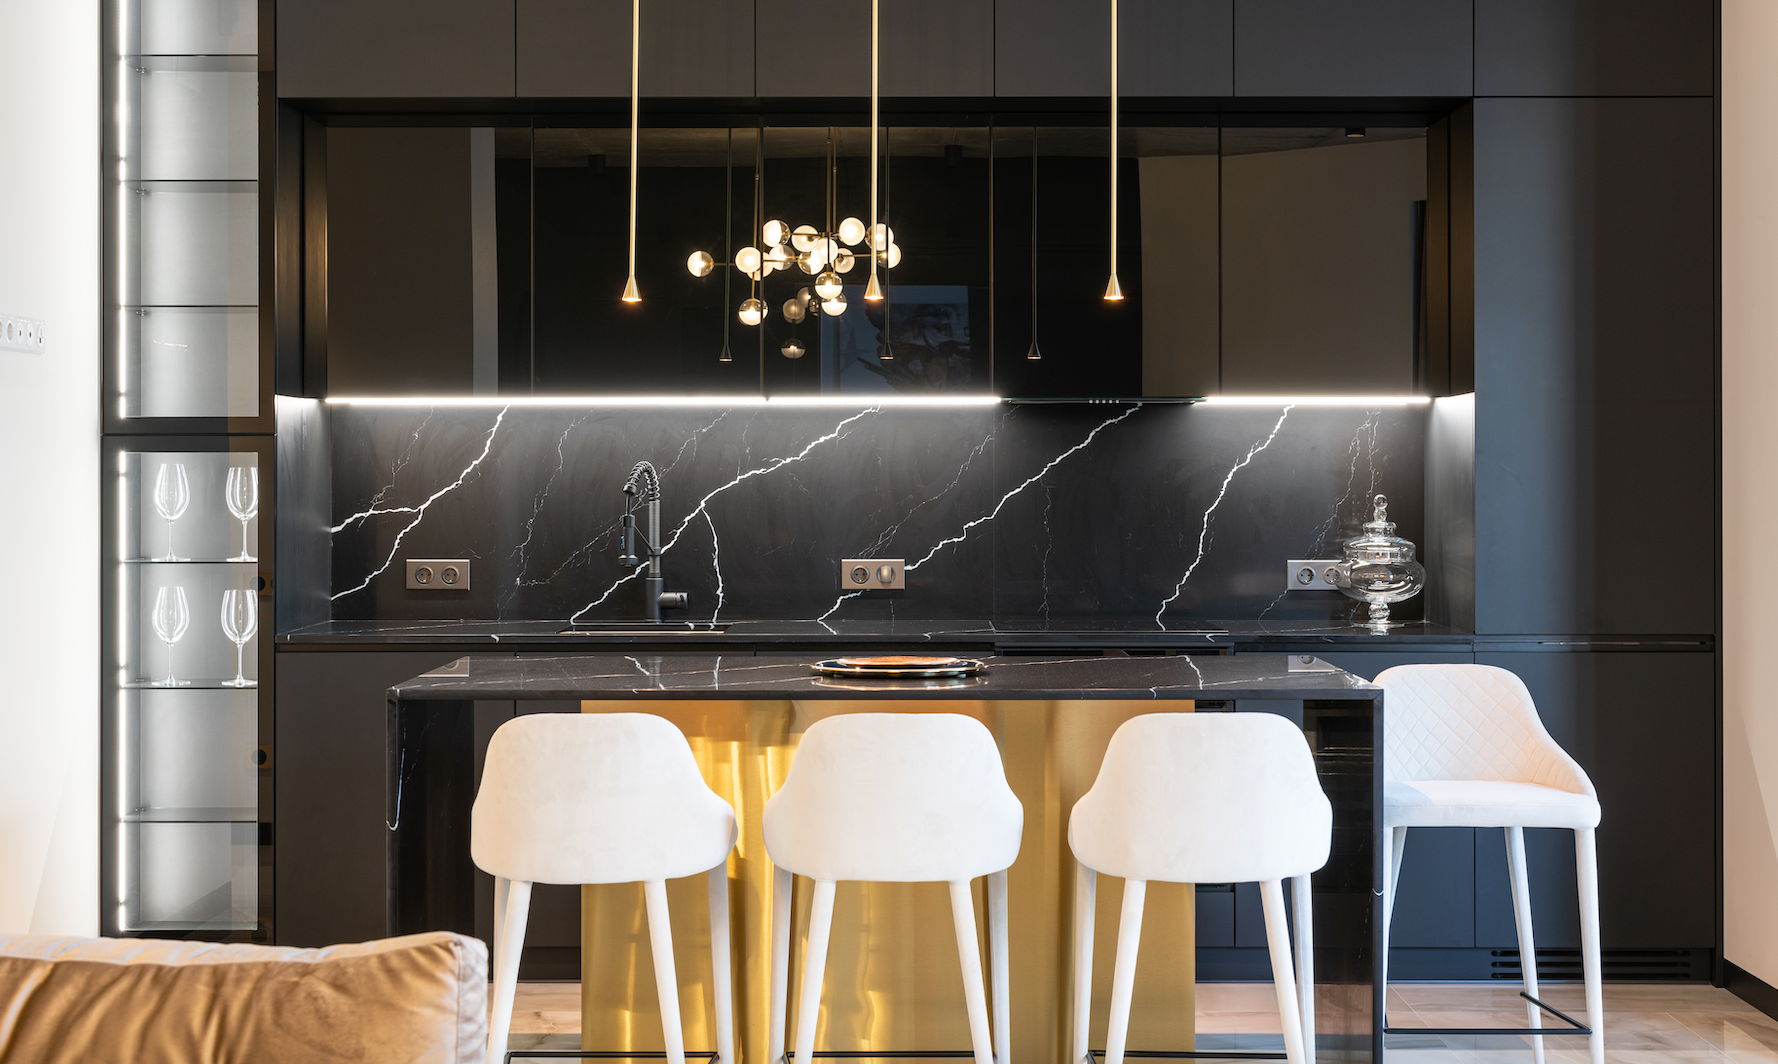 HONED VS. POLISHED MARBLE. WHAT'S THE DIFFERENCE?